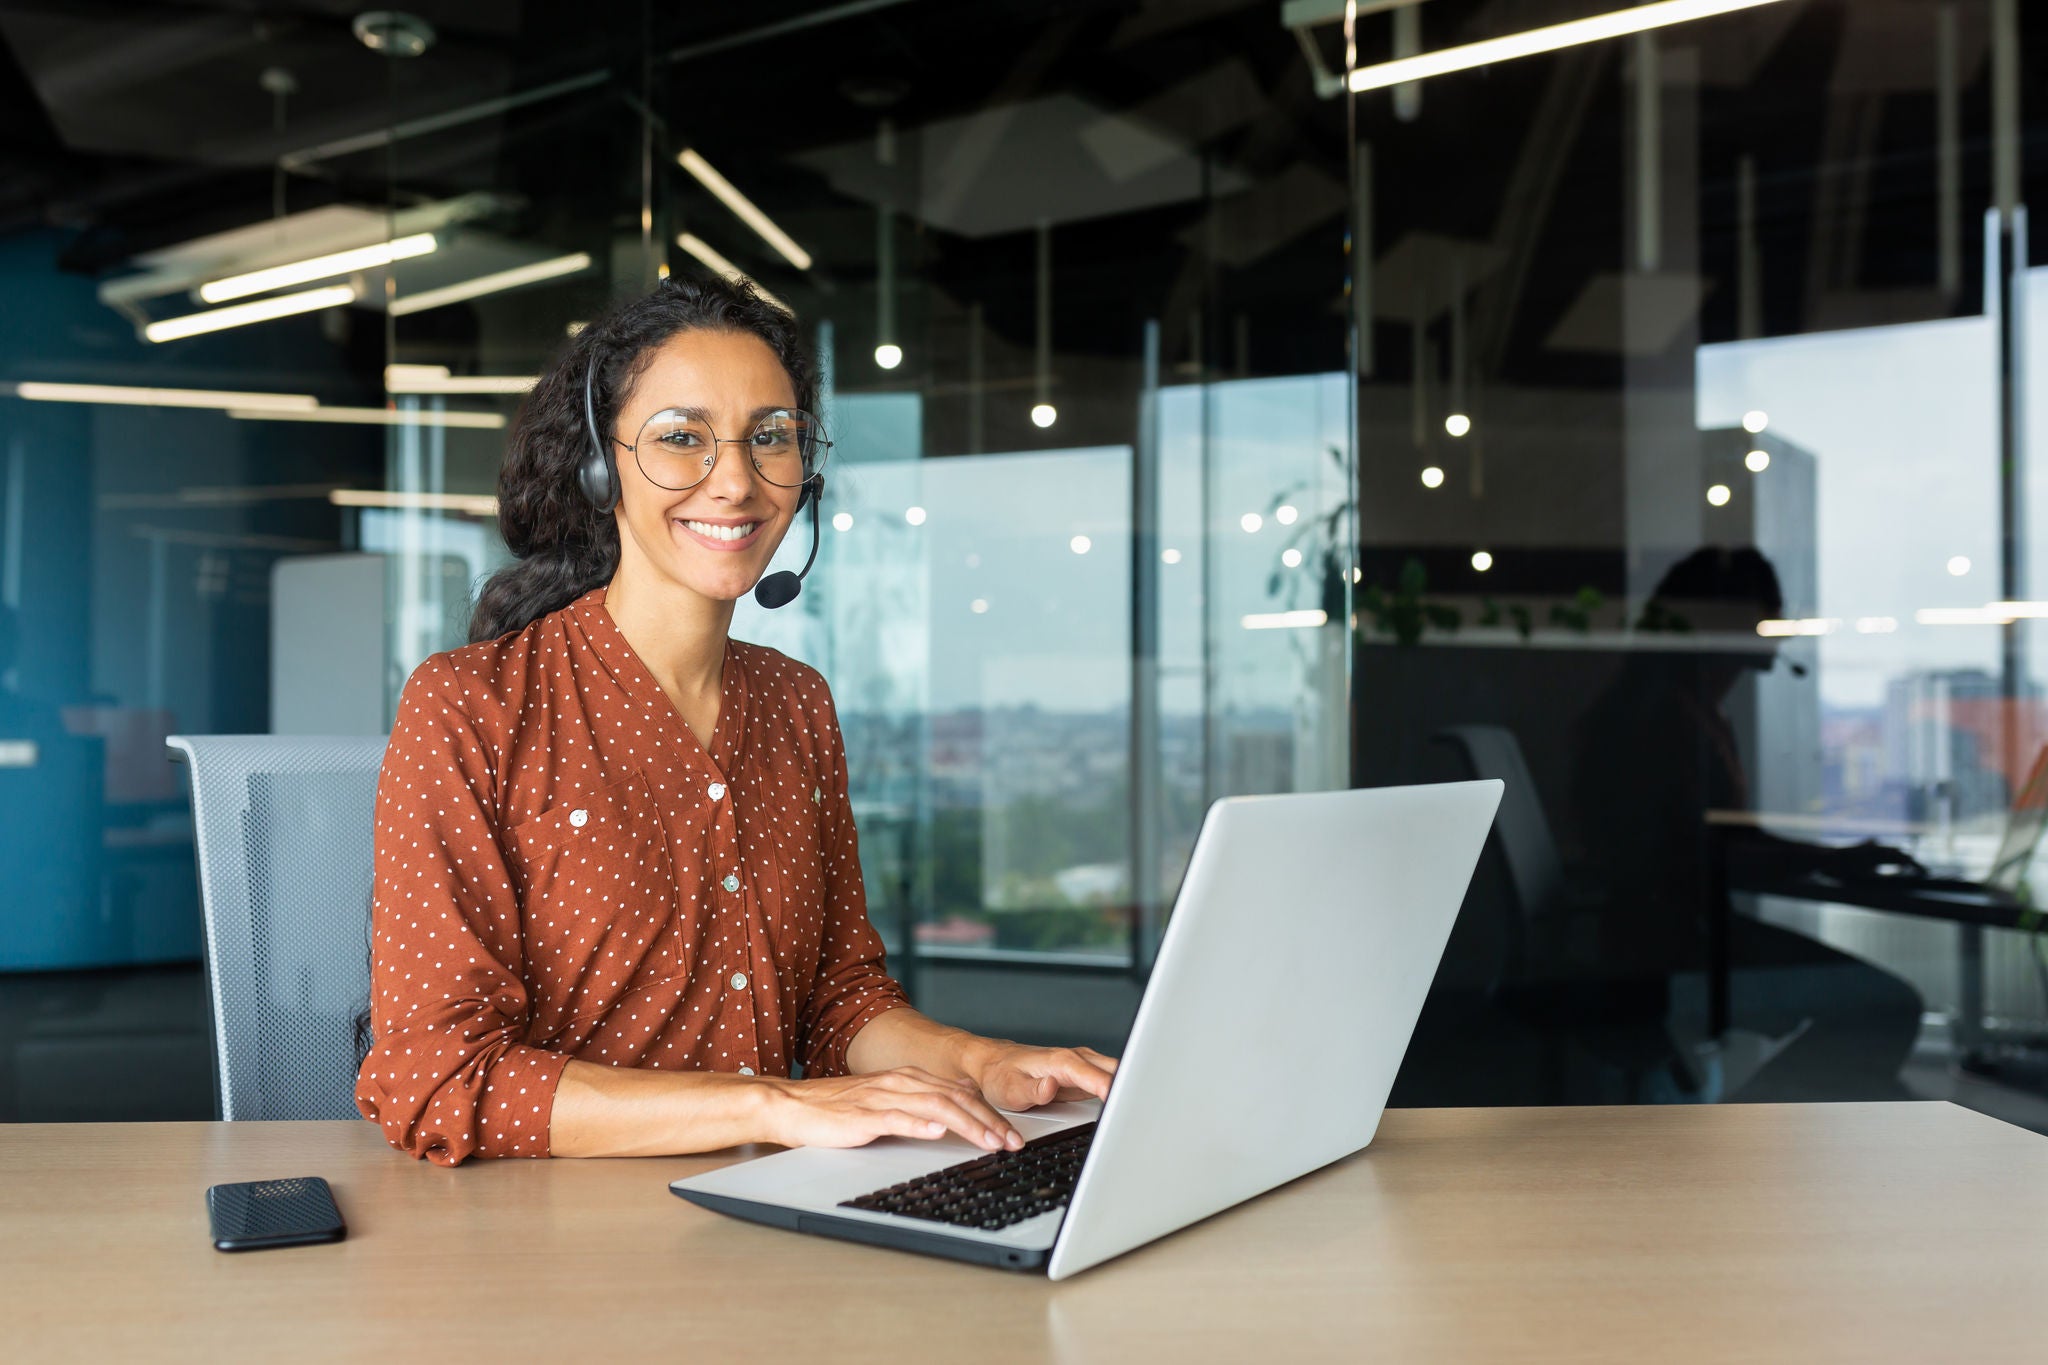 Portrait of business woman, office worker looking at camera and smiling, using headset and laptop for remote online communication, customer support tech call center worker.